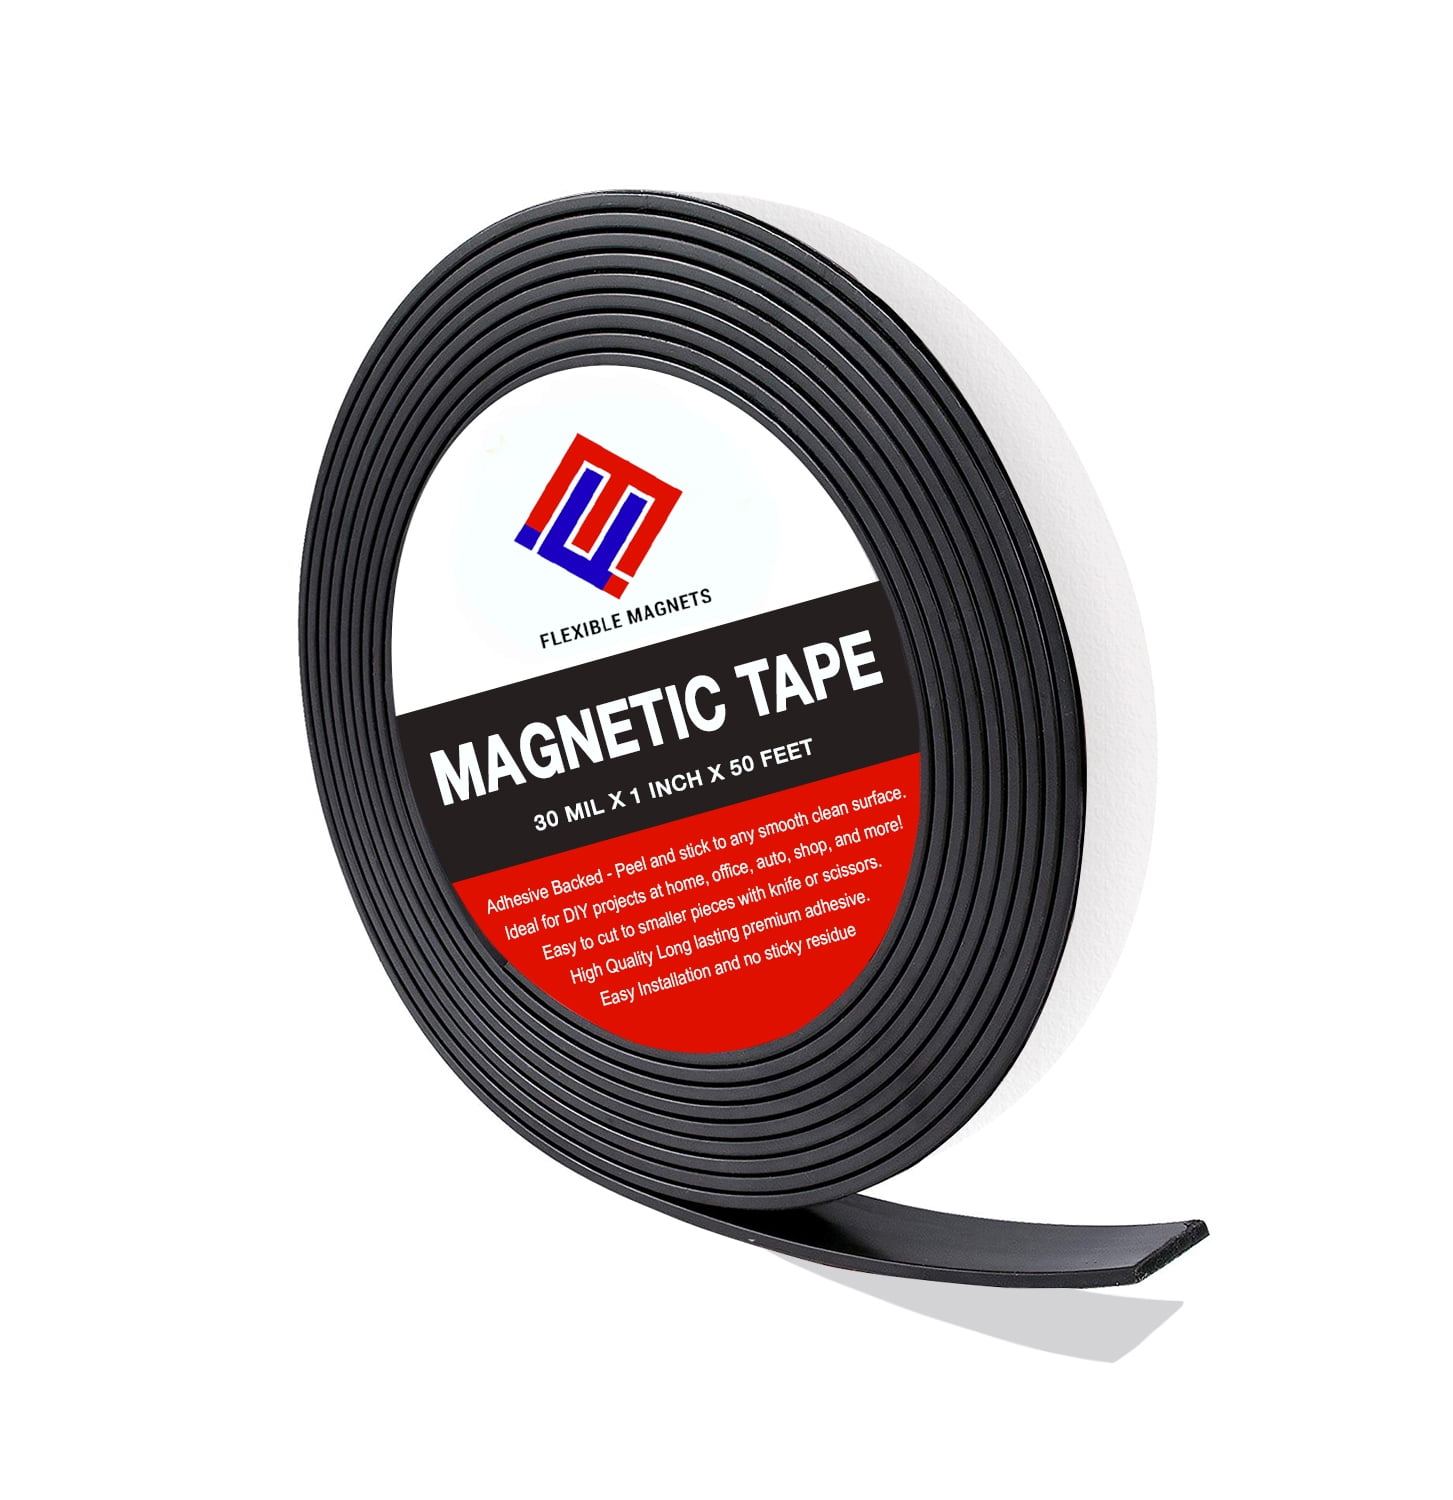 New 2Meter Self Adhesive Magnetic Tape Flexible Craft Sticky Magnet Strip 